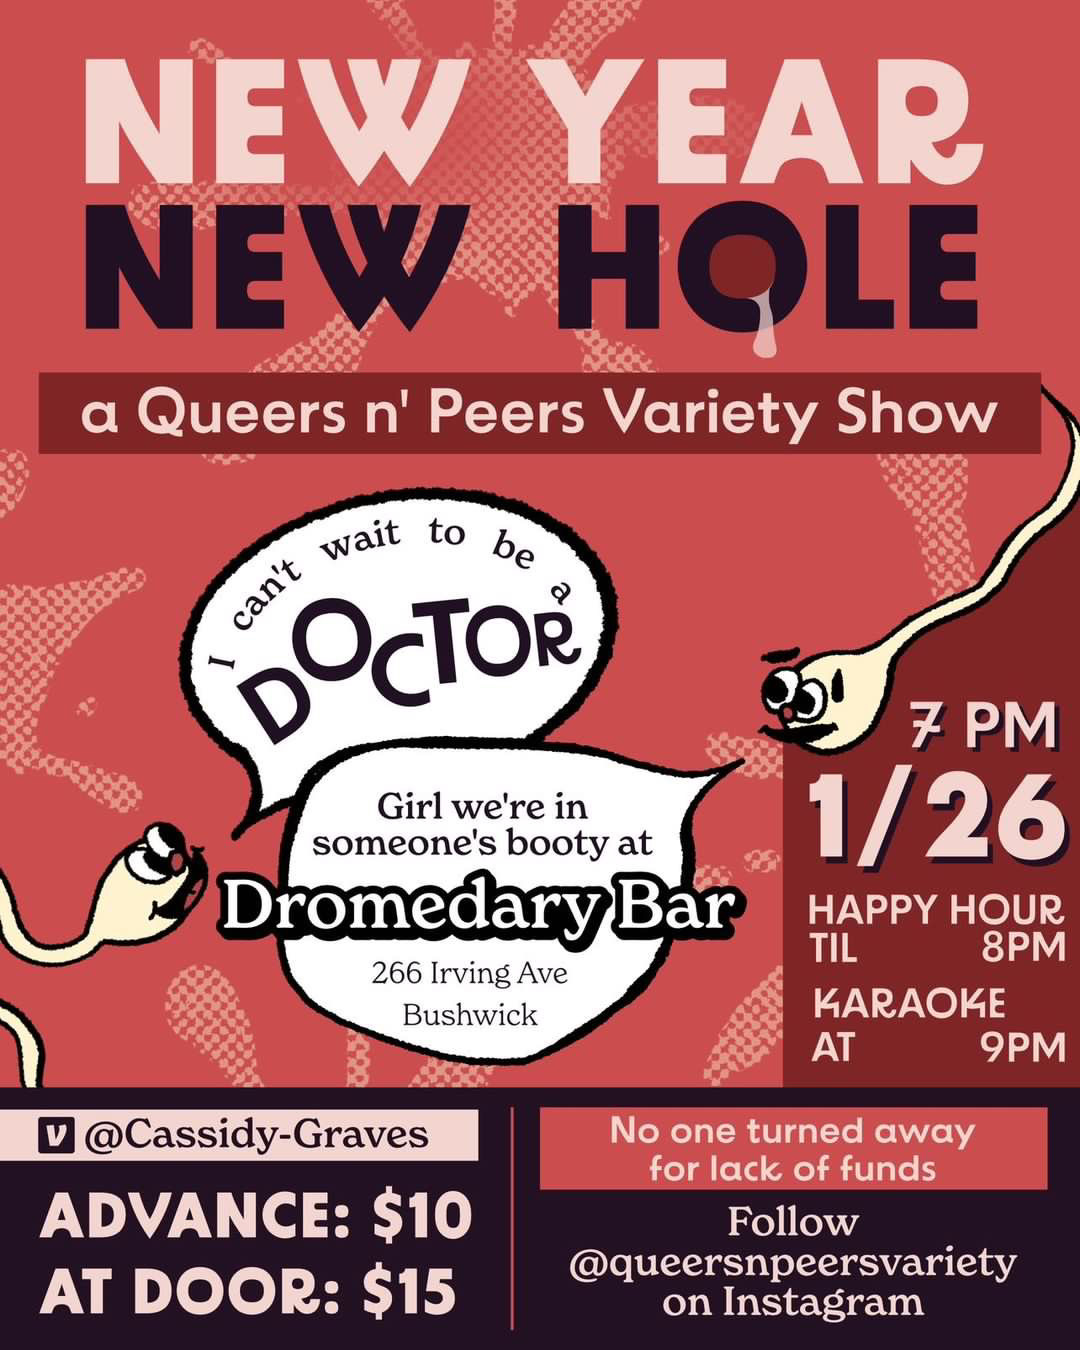 poster for Queers N Peers New Year New Hole variety show on Thursday, 1/26 at Dromedary bar in Bushwick, 7pm, no one turned away for lack of funds